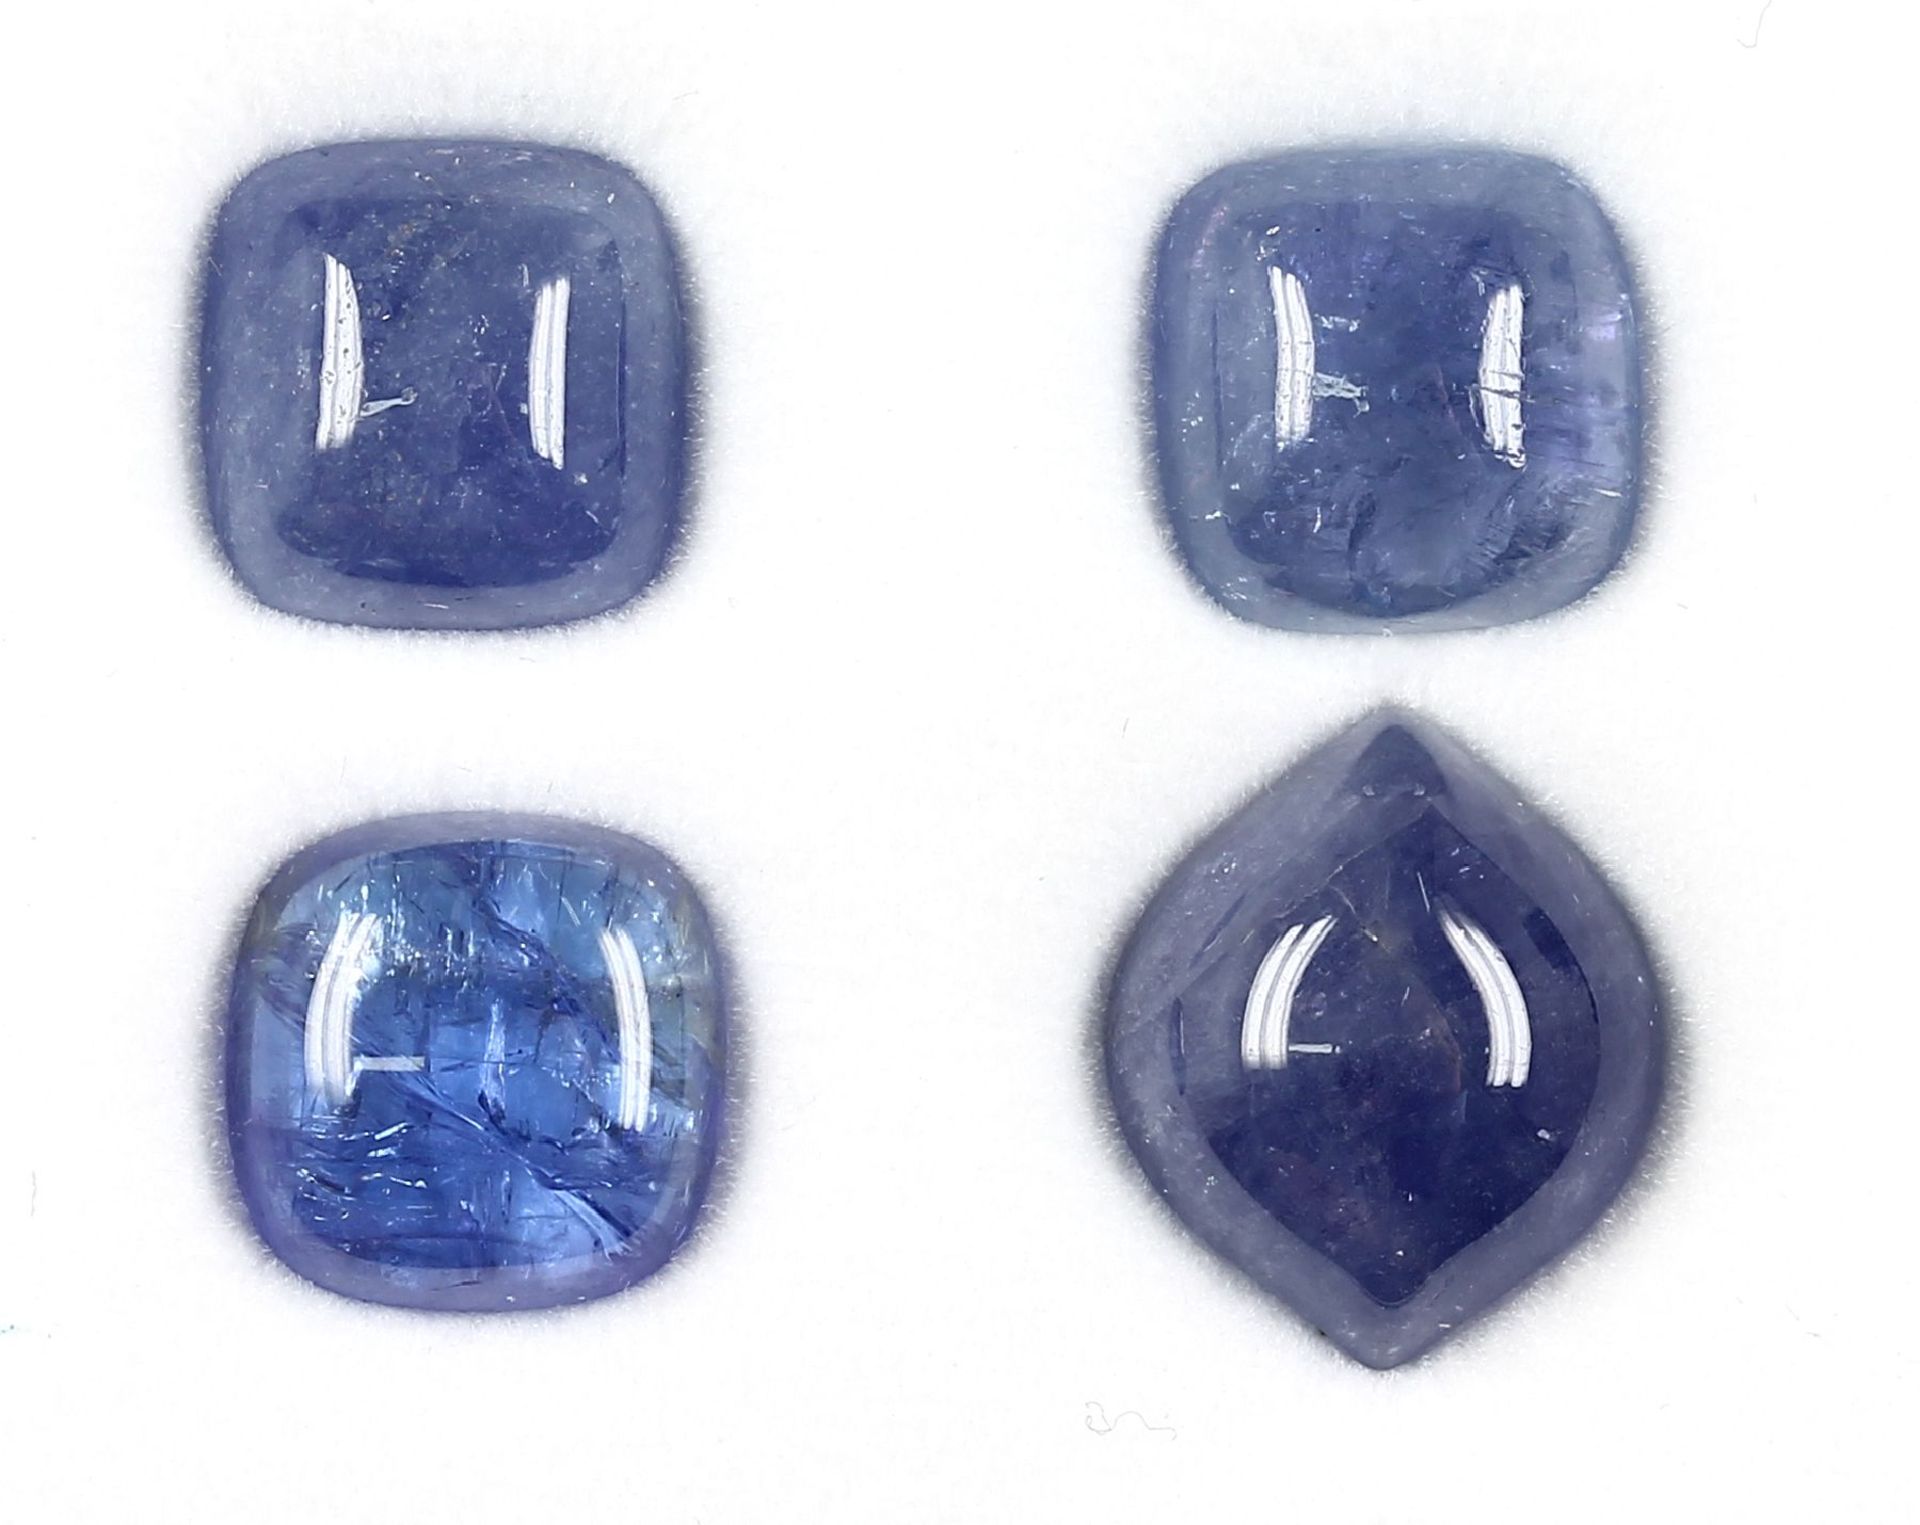 Lot 4 lose Tansanitcabochons, zus. 23.40 ct, in versch.